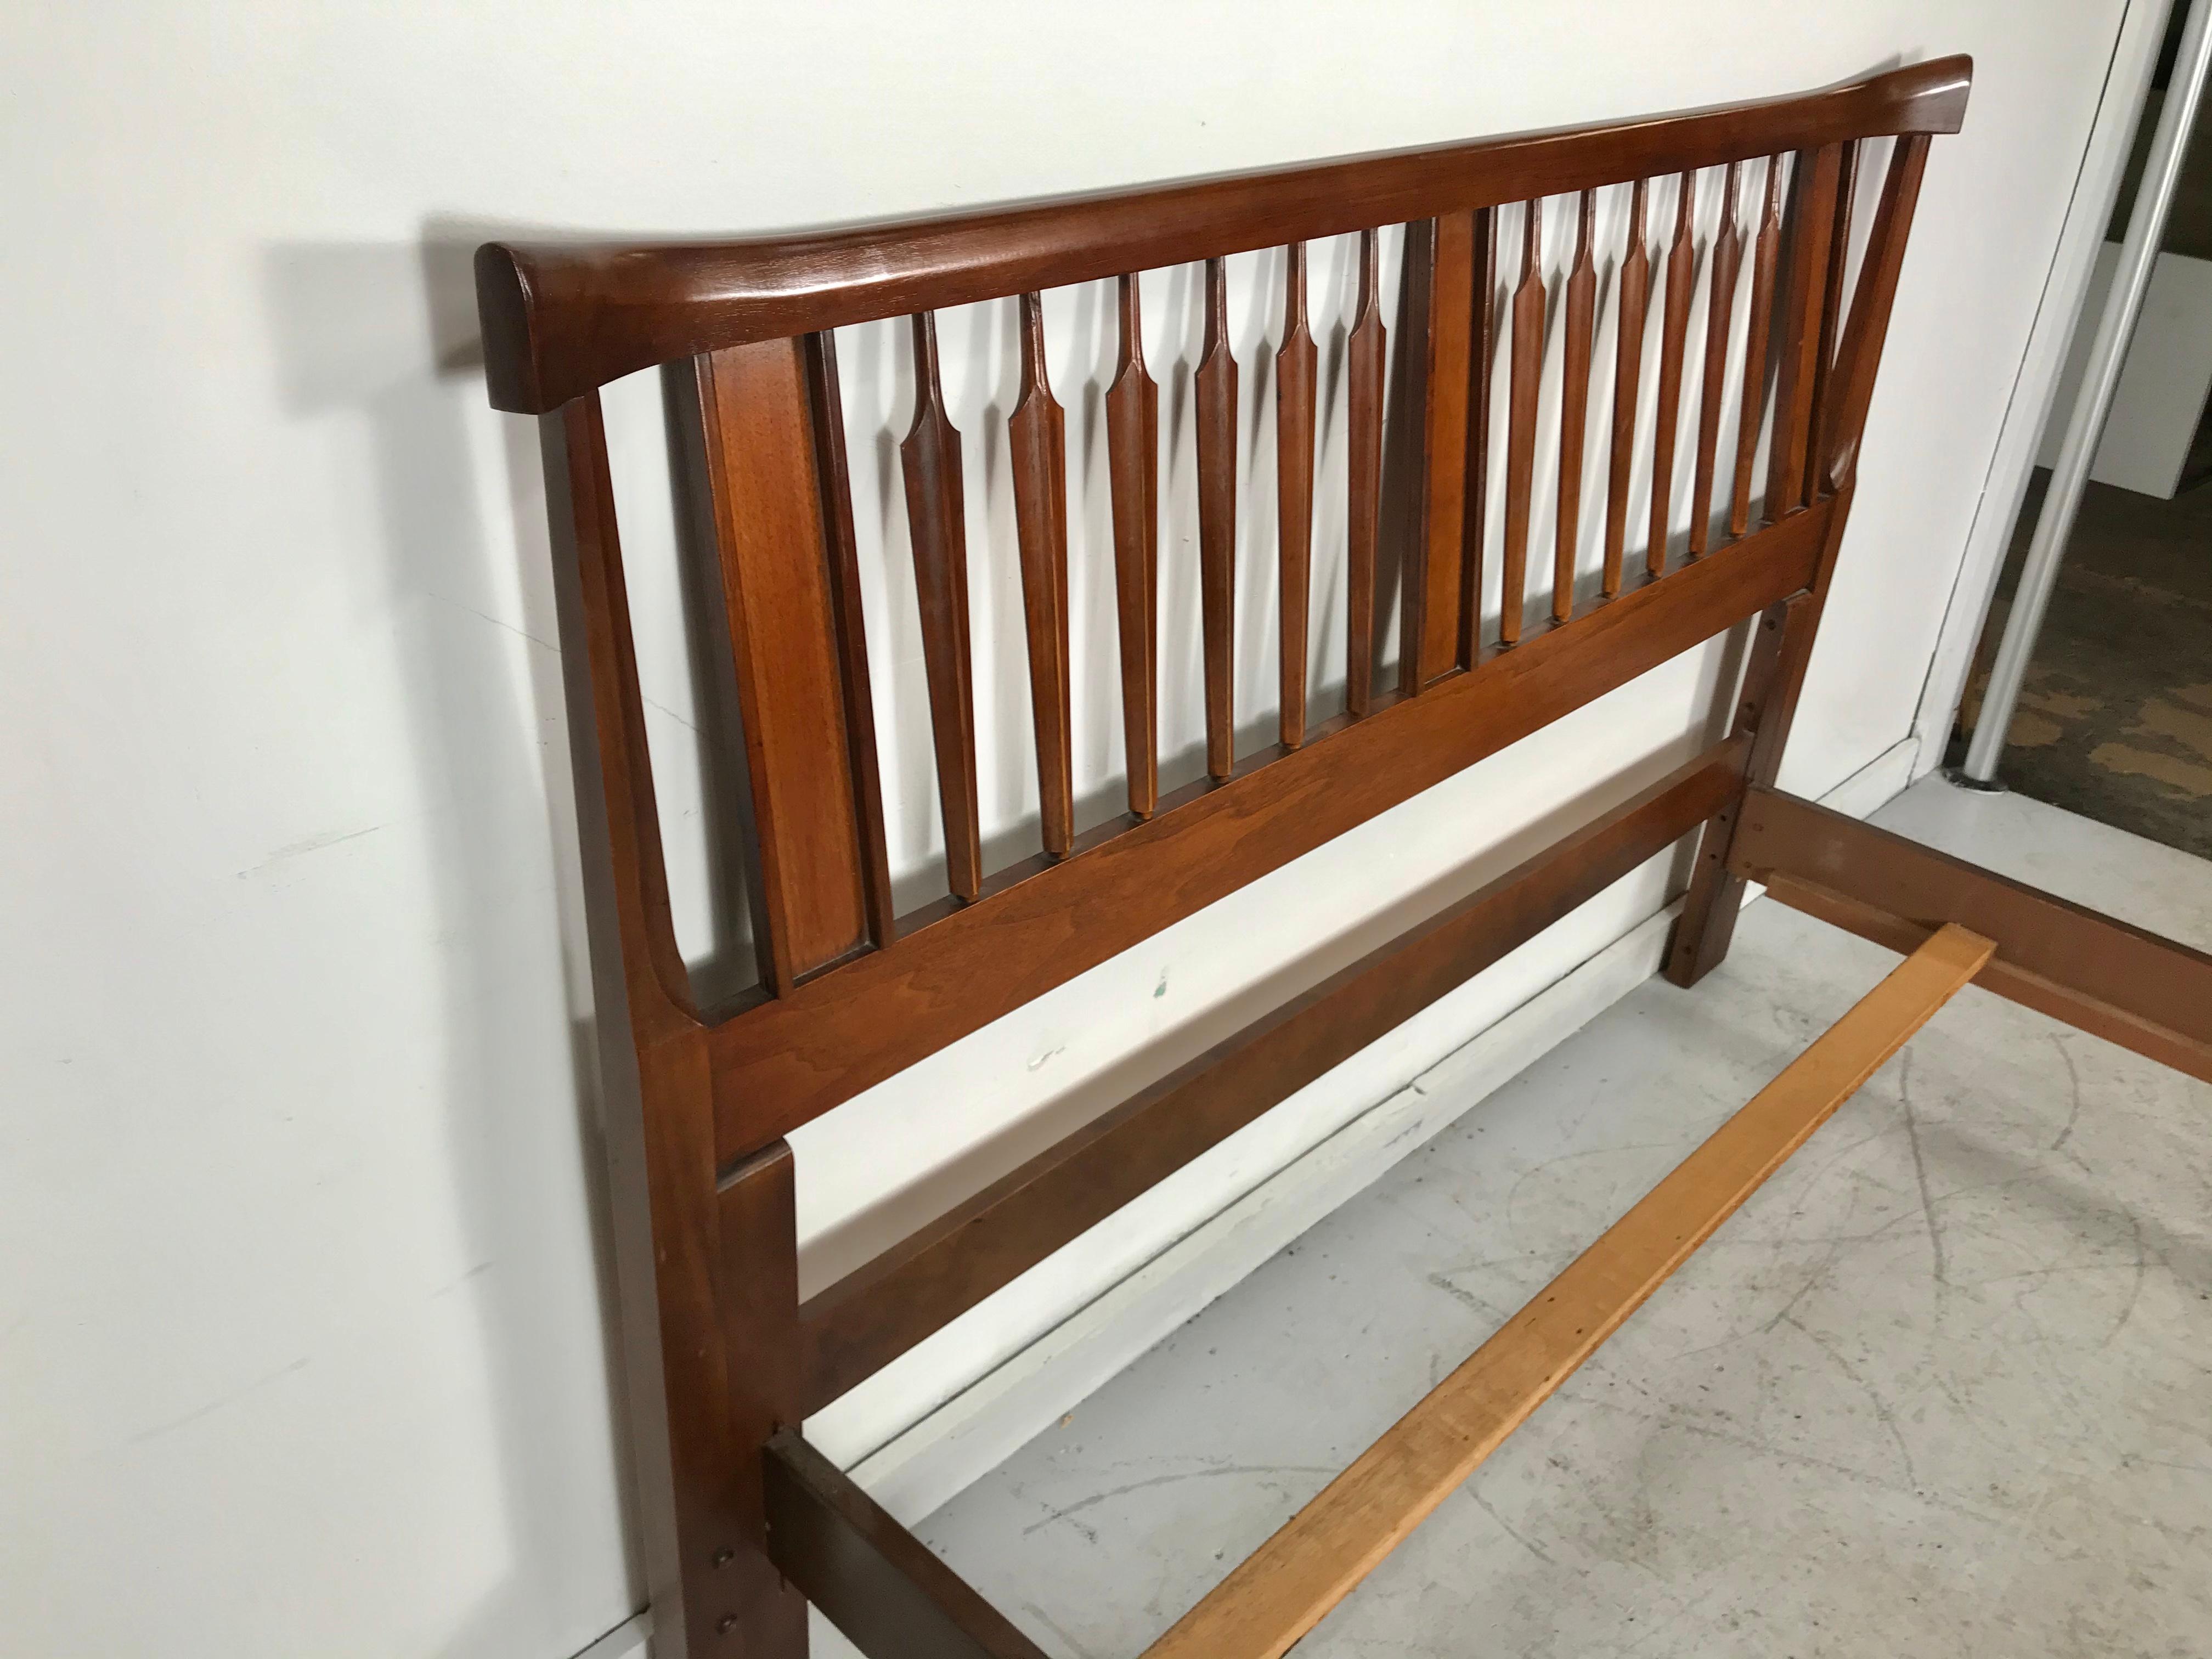 Mid-Century Modern, Asian inspired full bed. After Kipp Stewart. Superior quality and construction, solid sculpted walnut. Stunning design, Classic modernist.